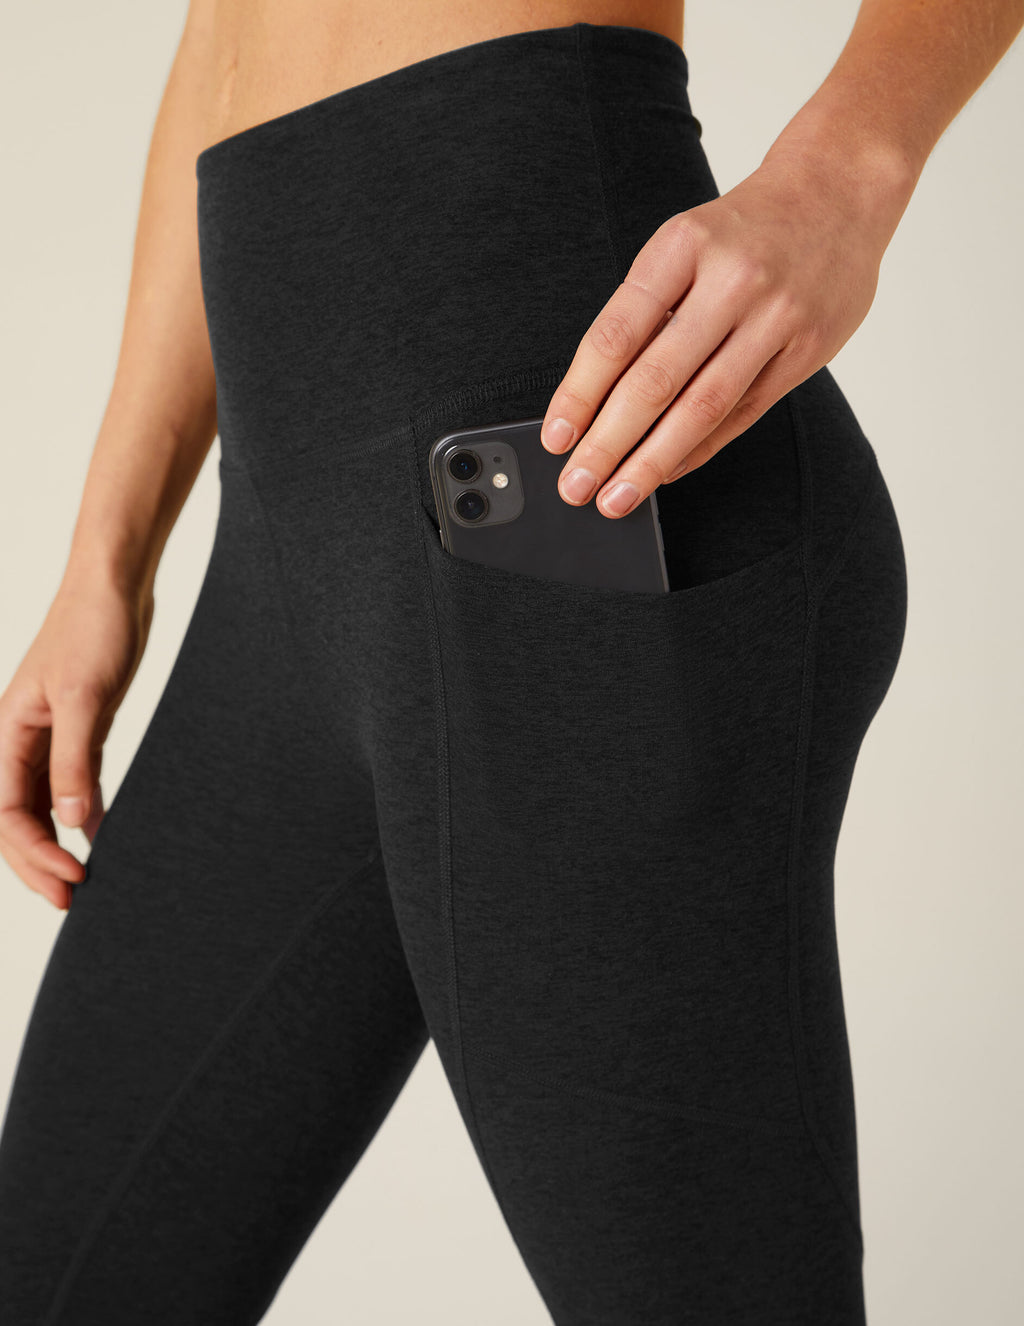 POPNINGKS High Waist Yoga Pants with Pockets for Women, Sexy